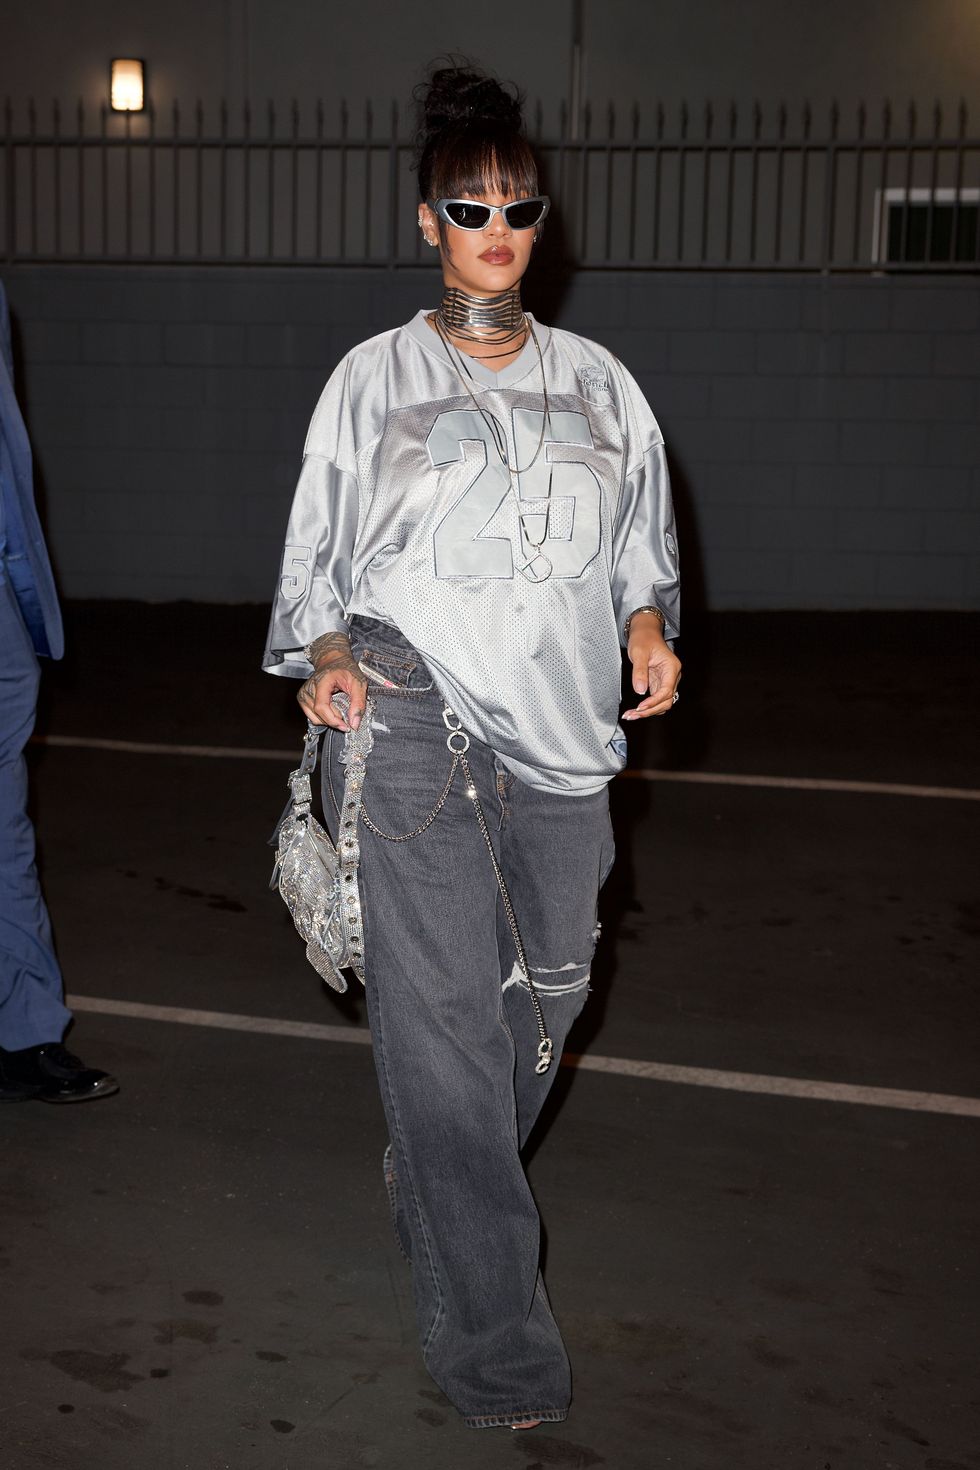 exclusive in the uk web set fee 300 gbp print fees to be agreed all other territories call for pricing mandatory credit photo by diggzyshutterstock 13451009b exclusive rihanna exclusive rihanna scores a touchdown in silver football jersey as she hits the studio to prepare for her superbowl performance, los angeles, california, usa 09 oct 2022